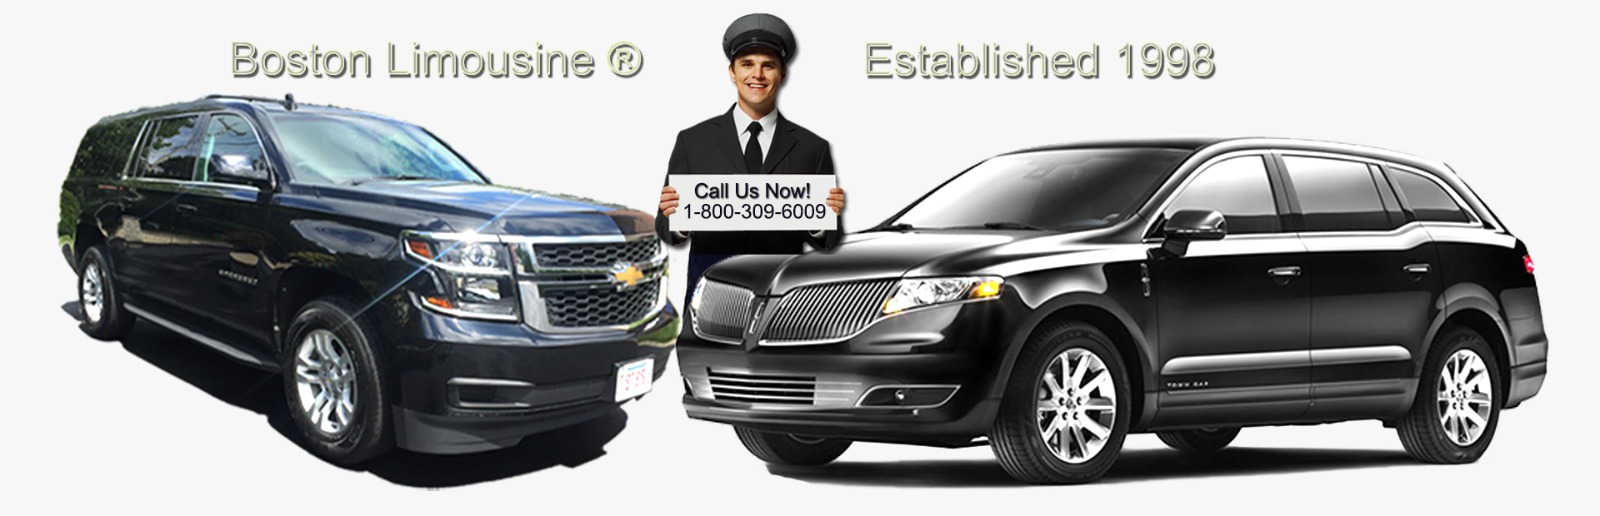 Rates and Reservation at Boston Limousine